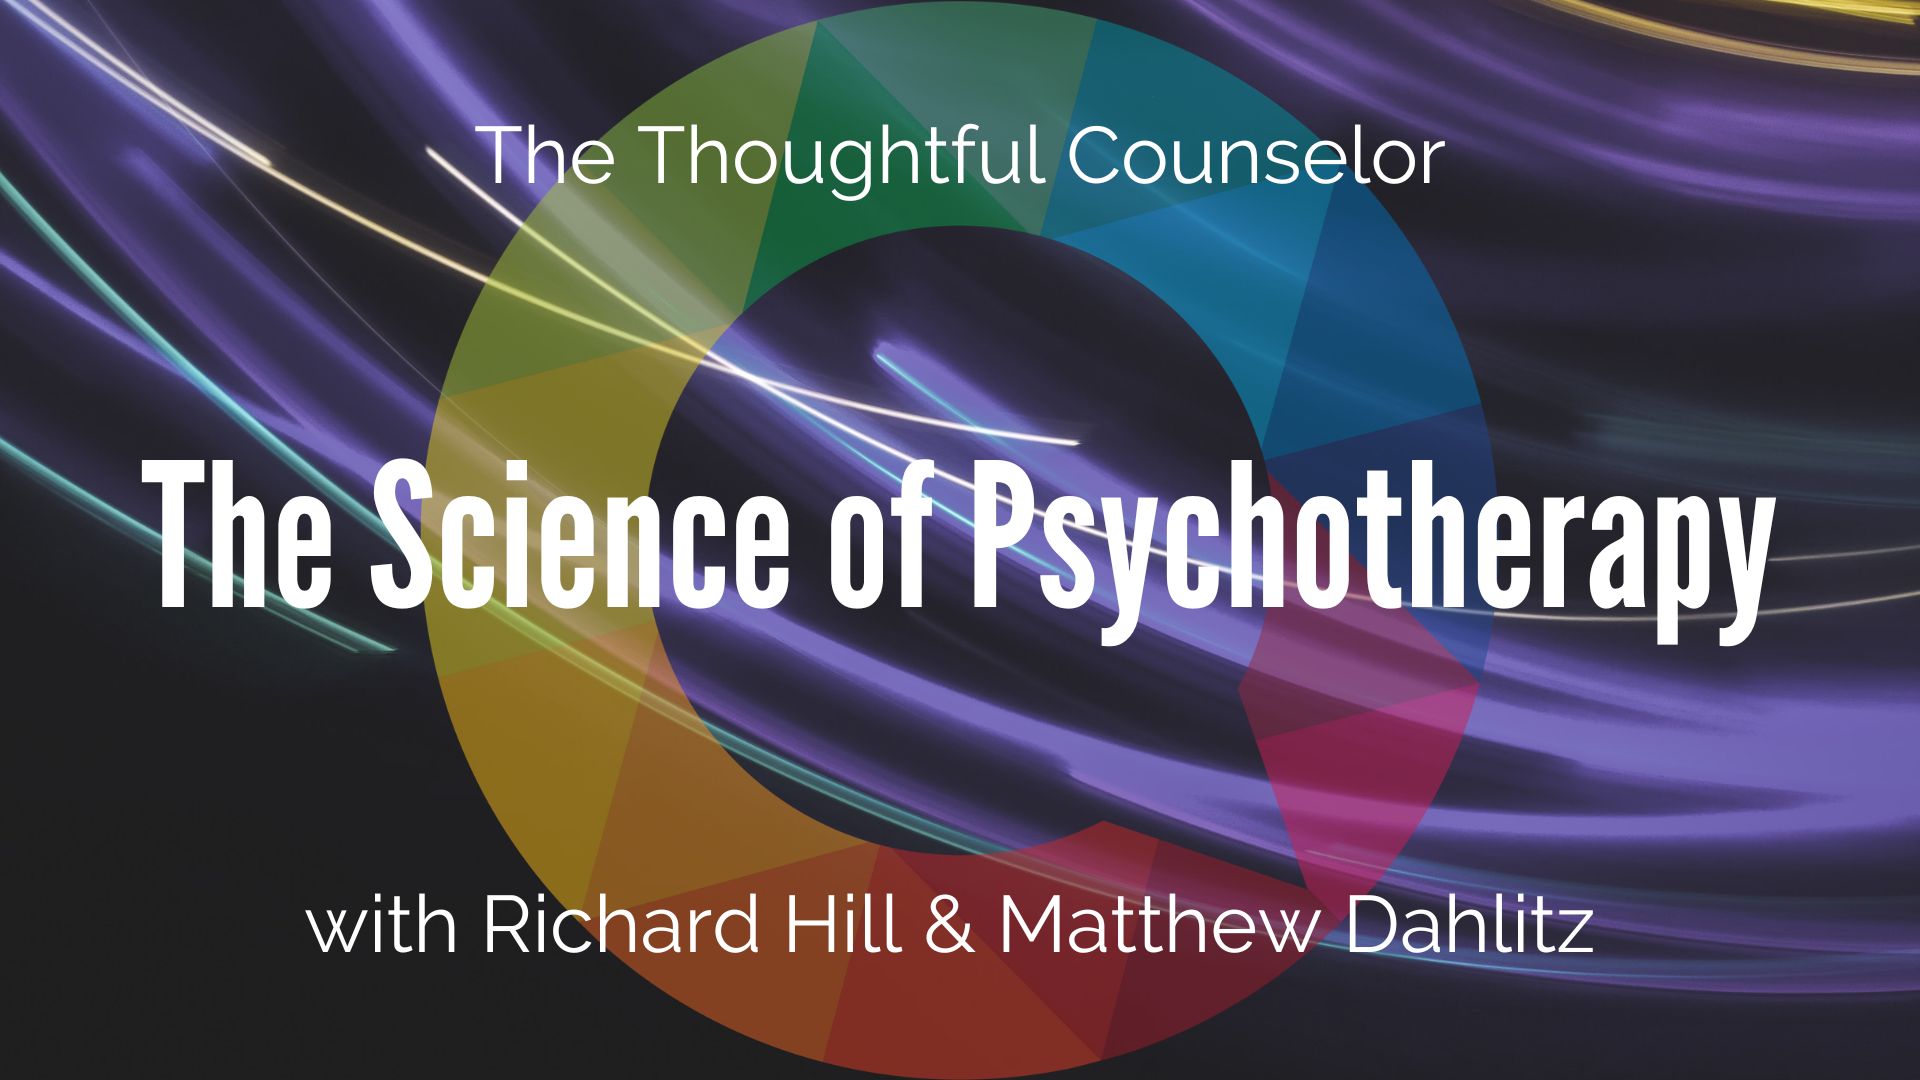 An Expansive Perspective on the Science of Psychotherapy